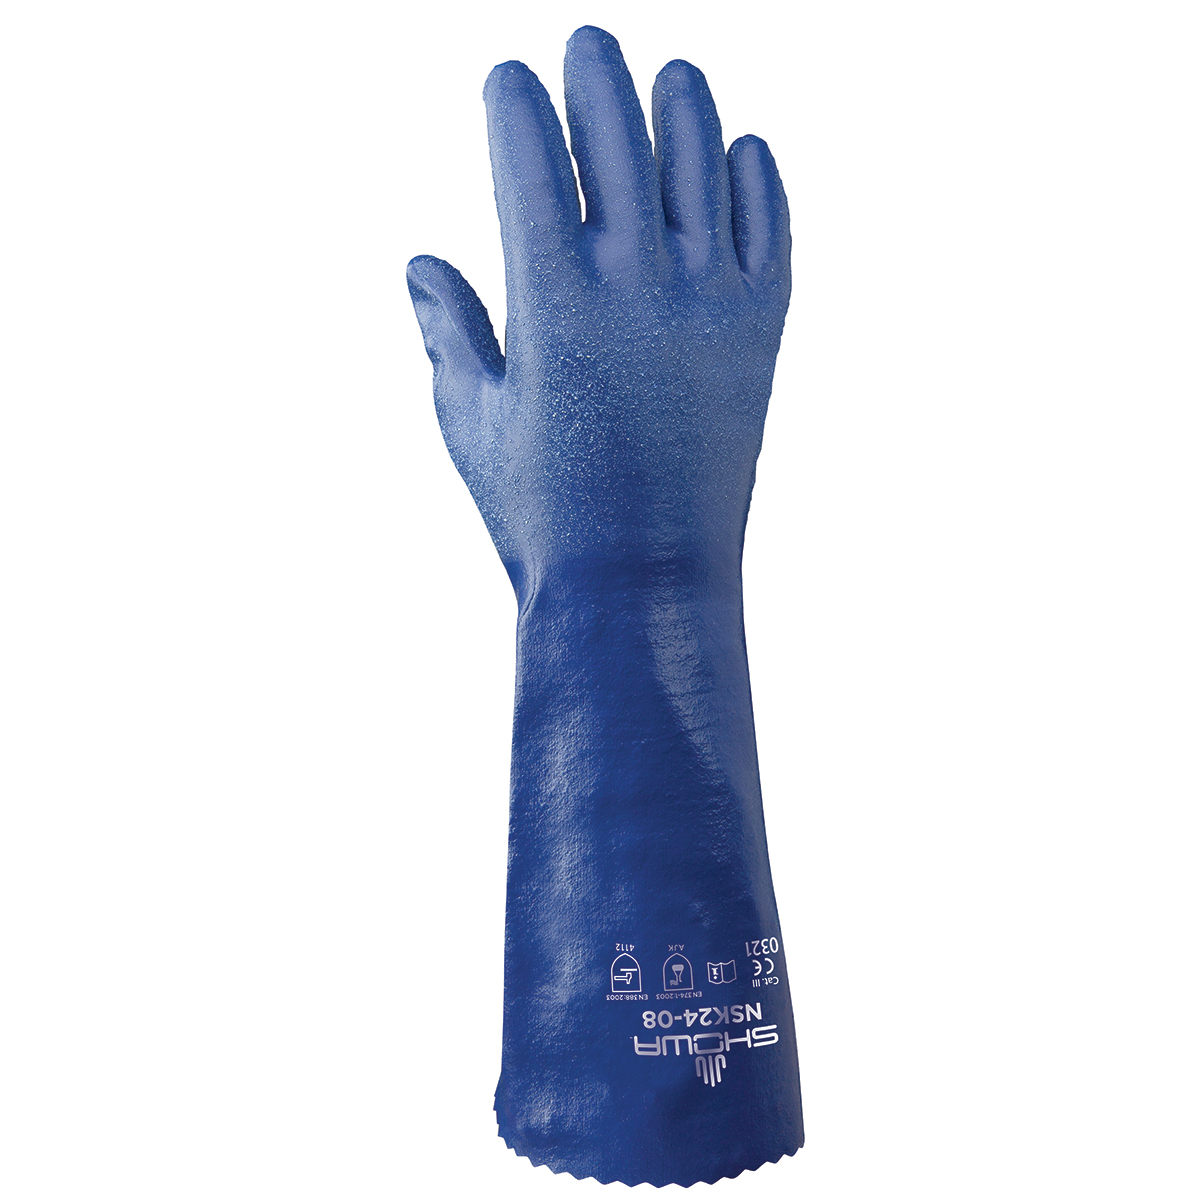 Chemical resistant nitrile, fully coated 14